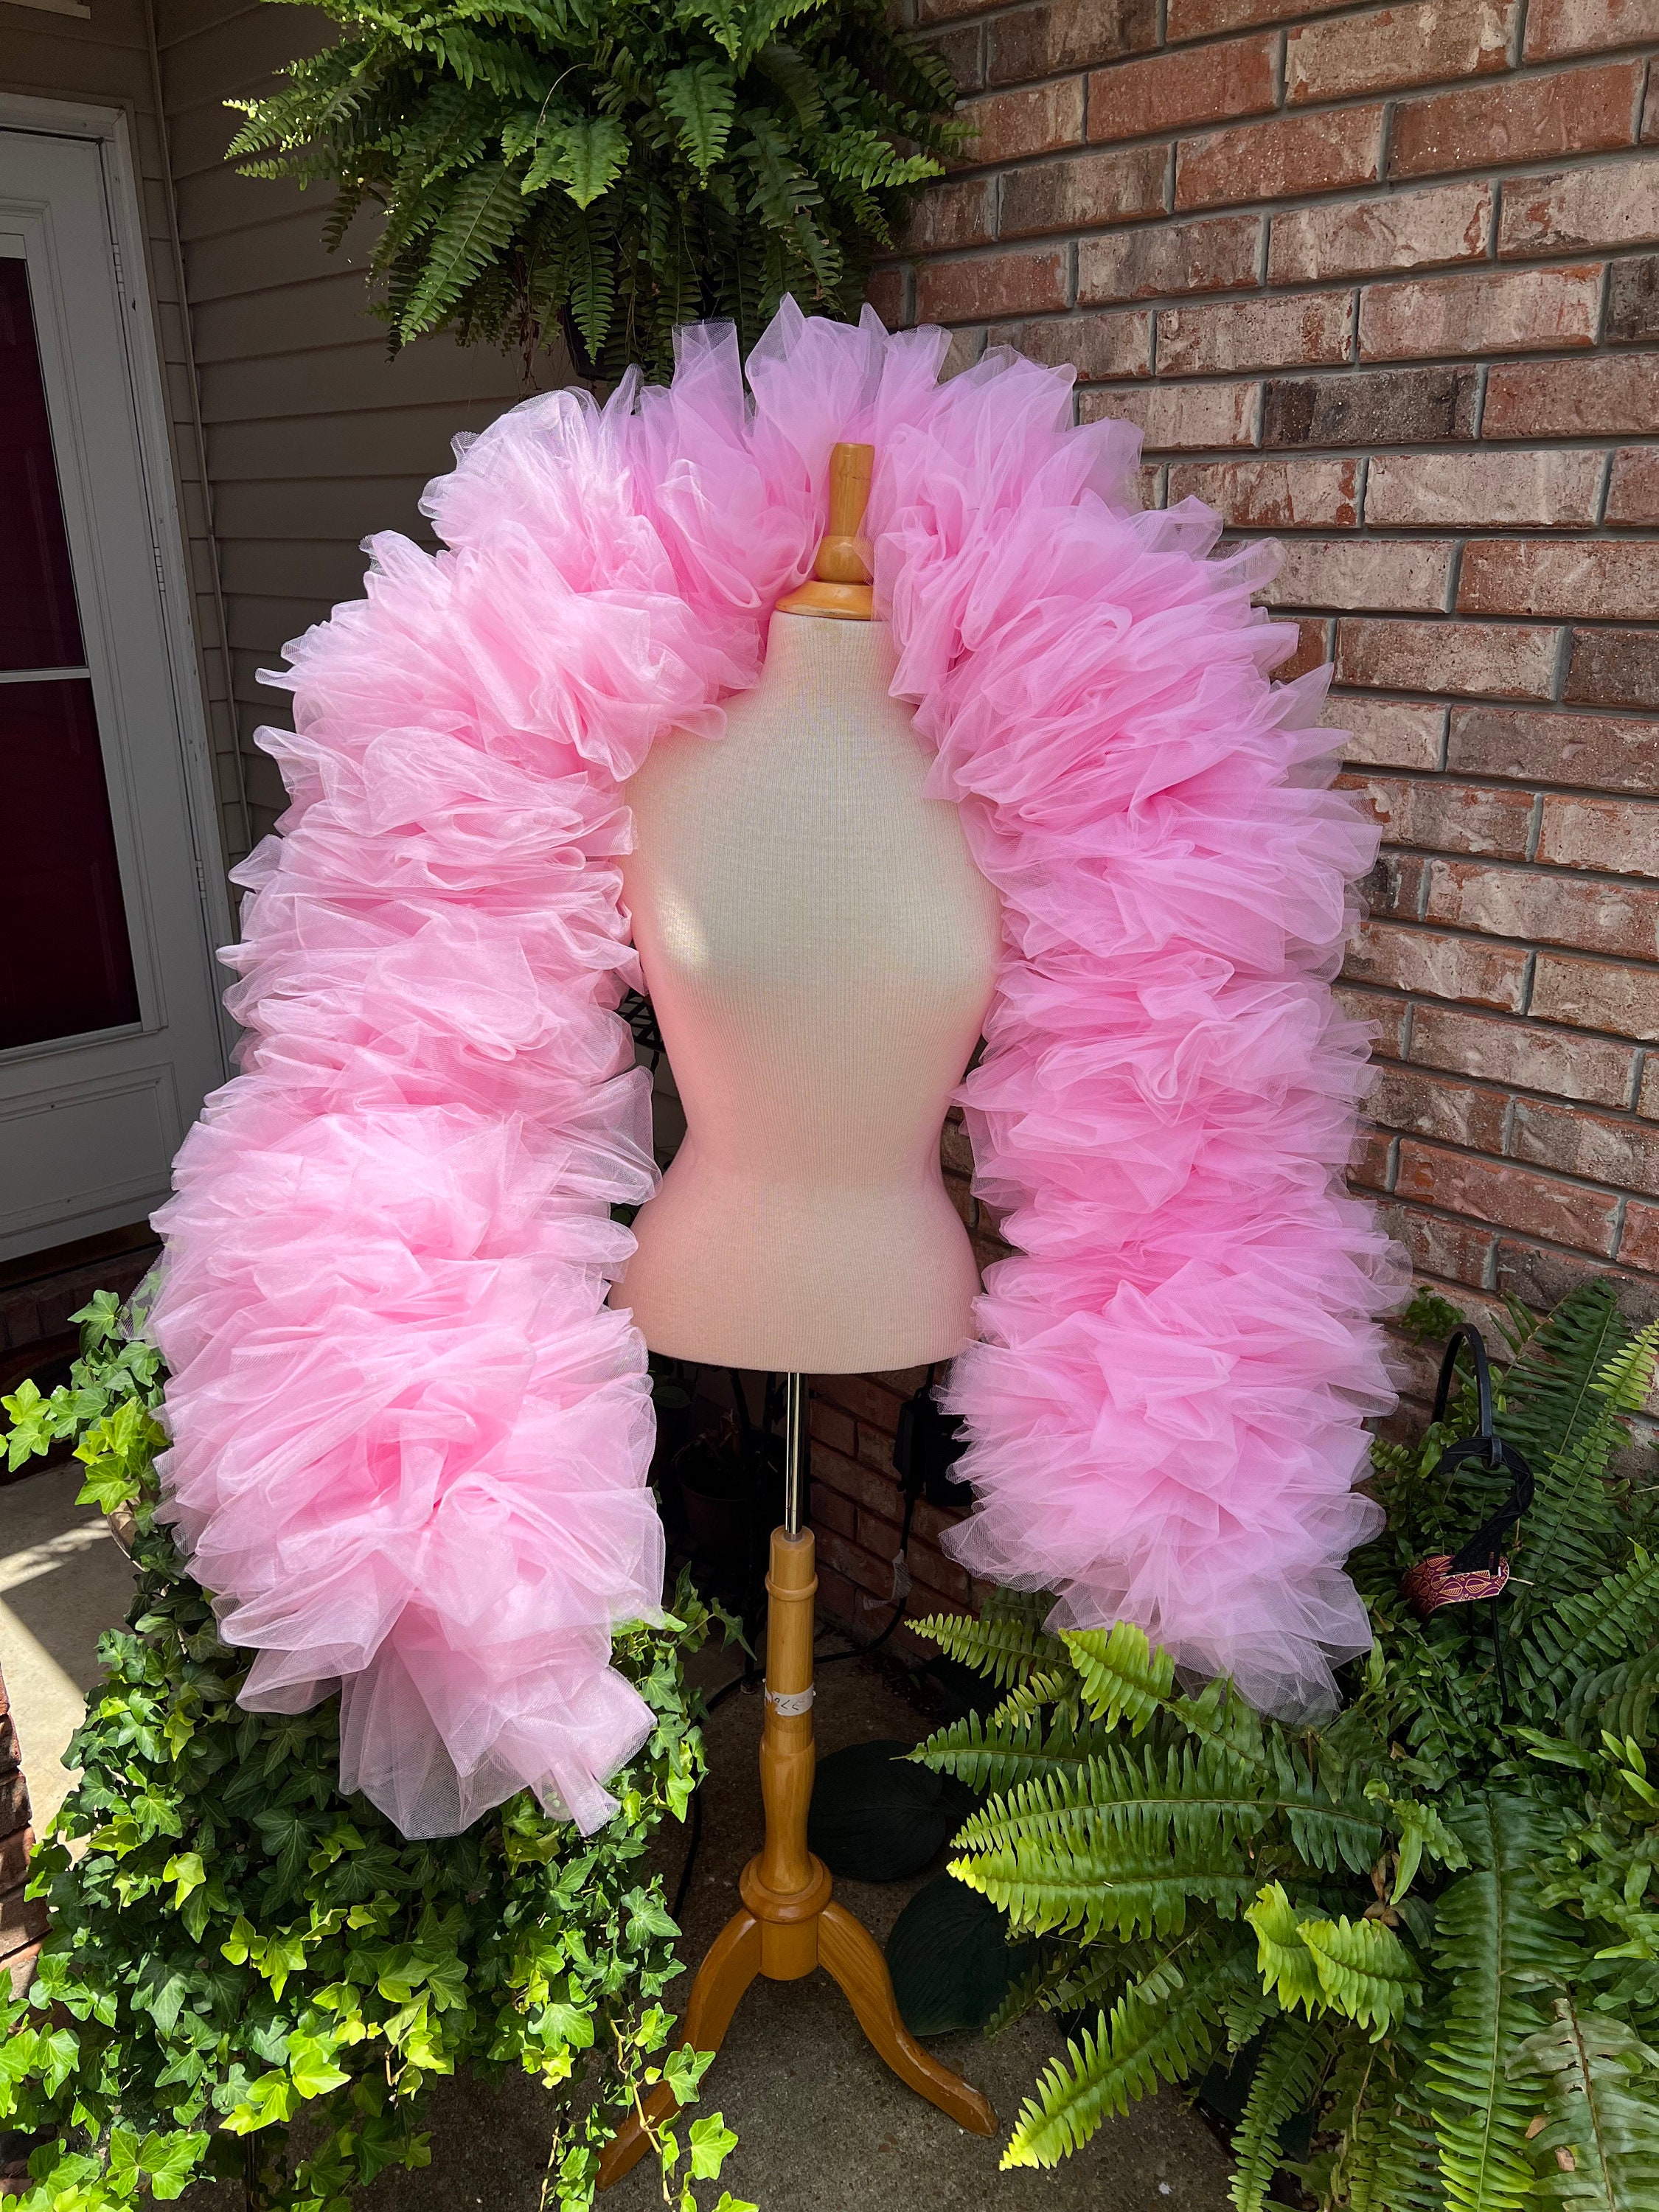 2 Yards - Candy Pink 3 Ply Ostrich Medium Weight Fluffy Feather Boa